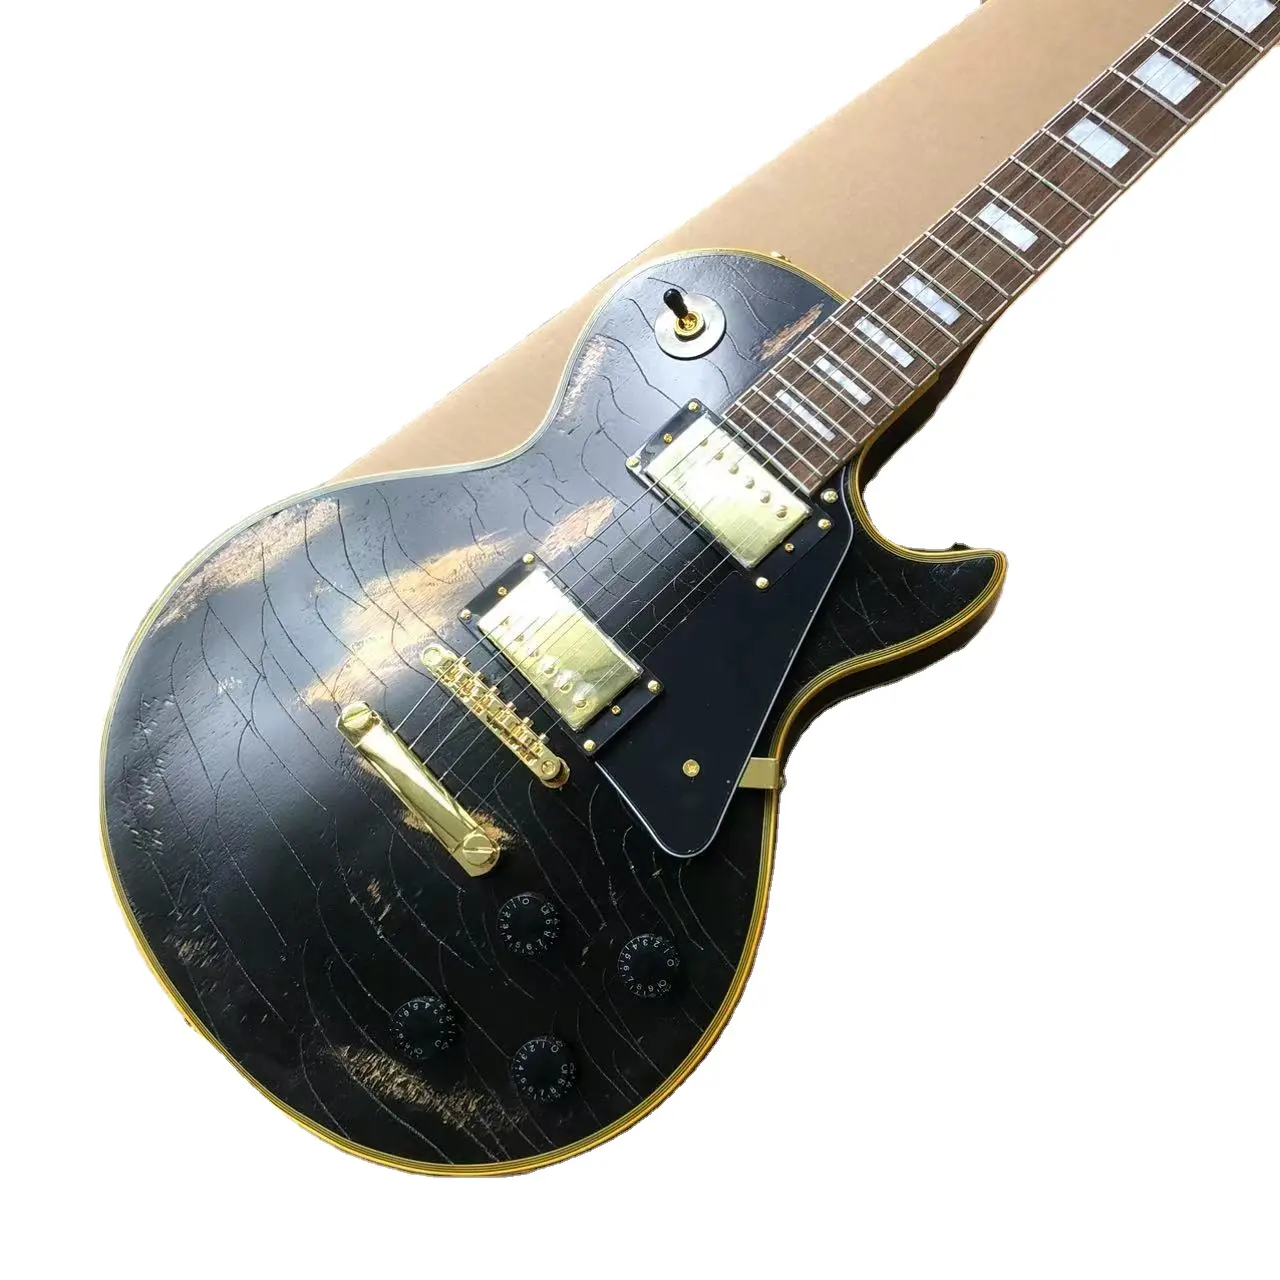 Hot classic electric guitar, exquisite tiger skin pattern, comfortable feeling, moving tone